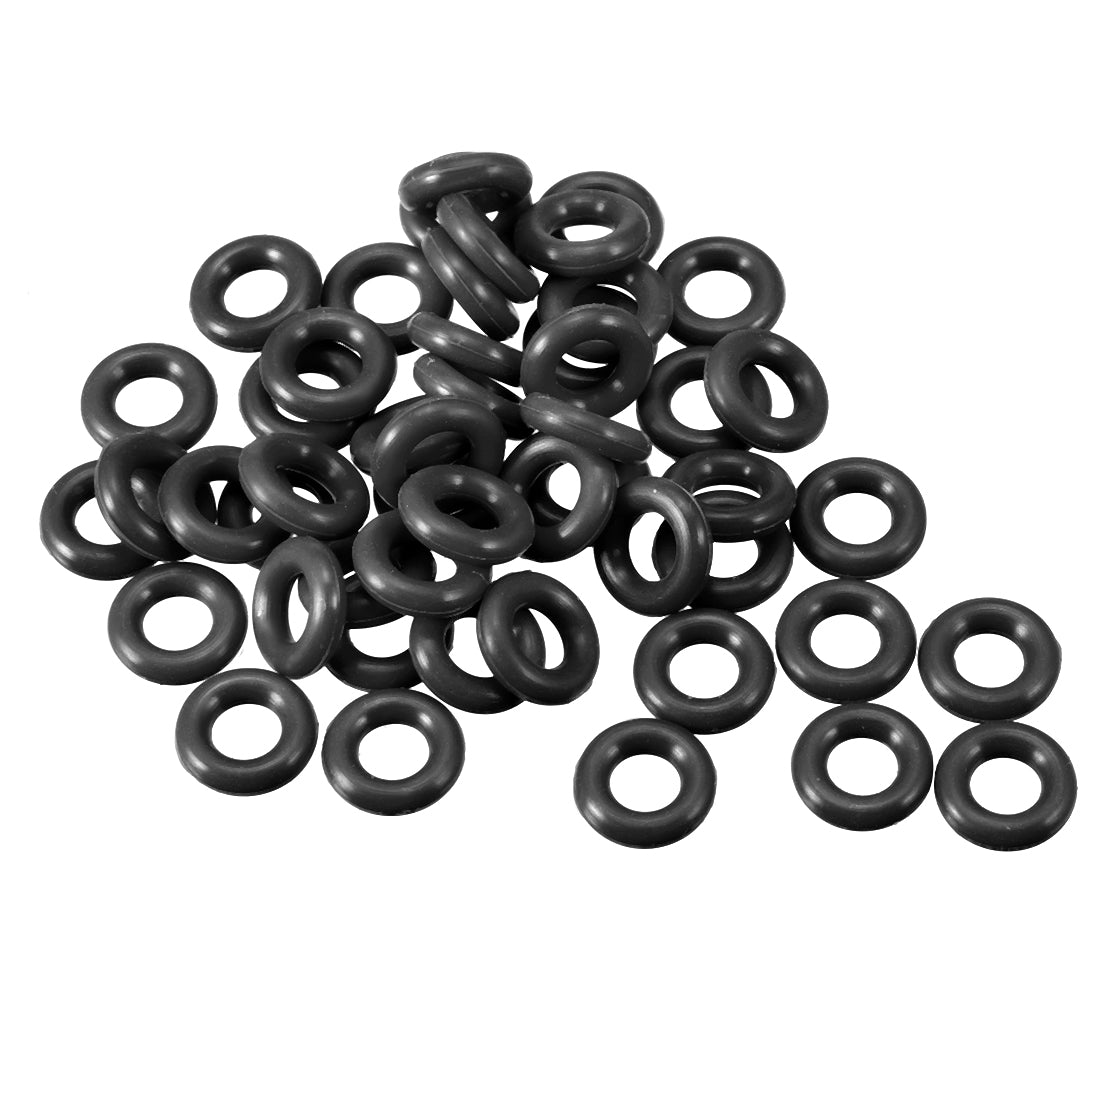 Practical Product 50Pcs Silicone O Ring Seal Sealing Gasket 3Mm X